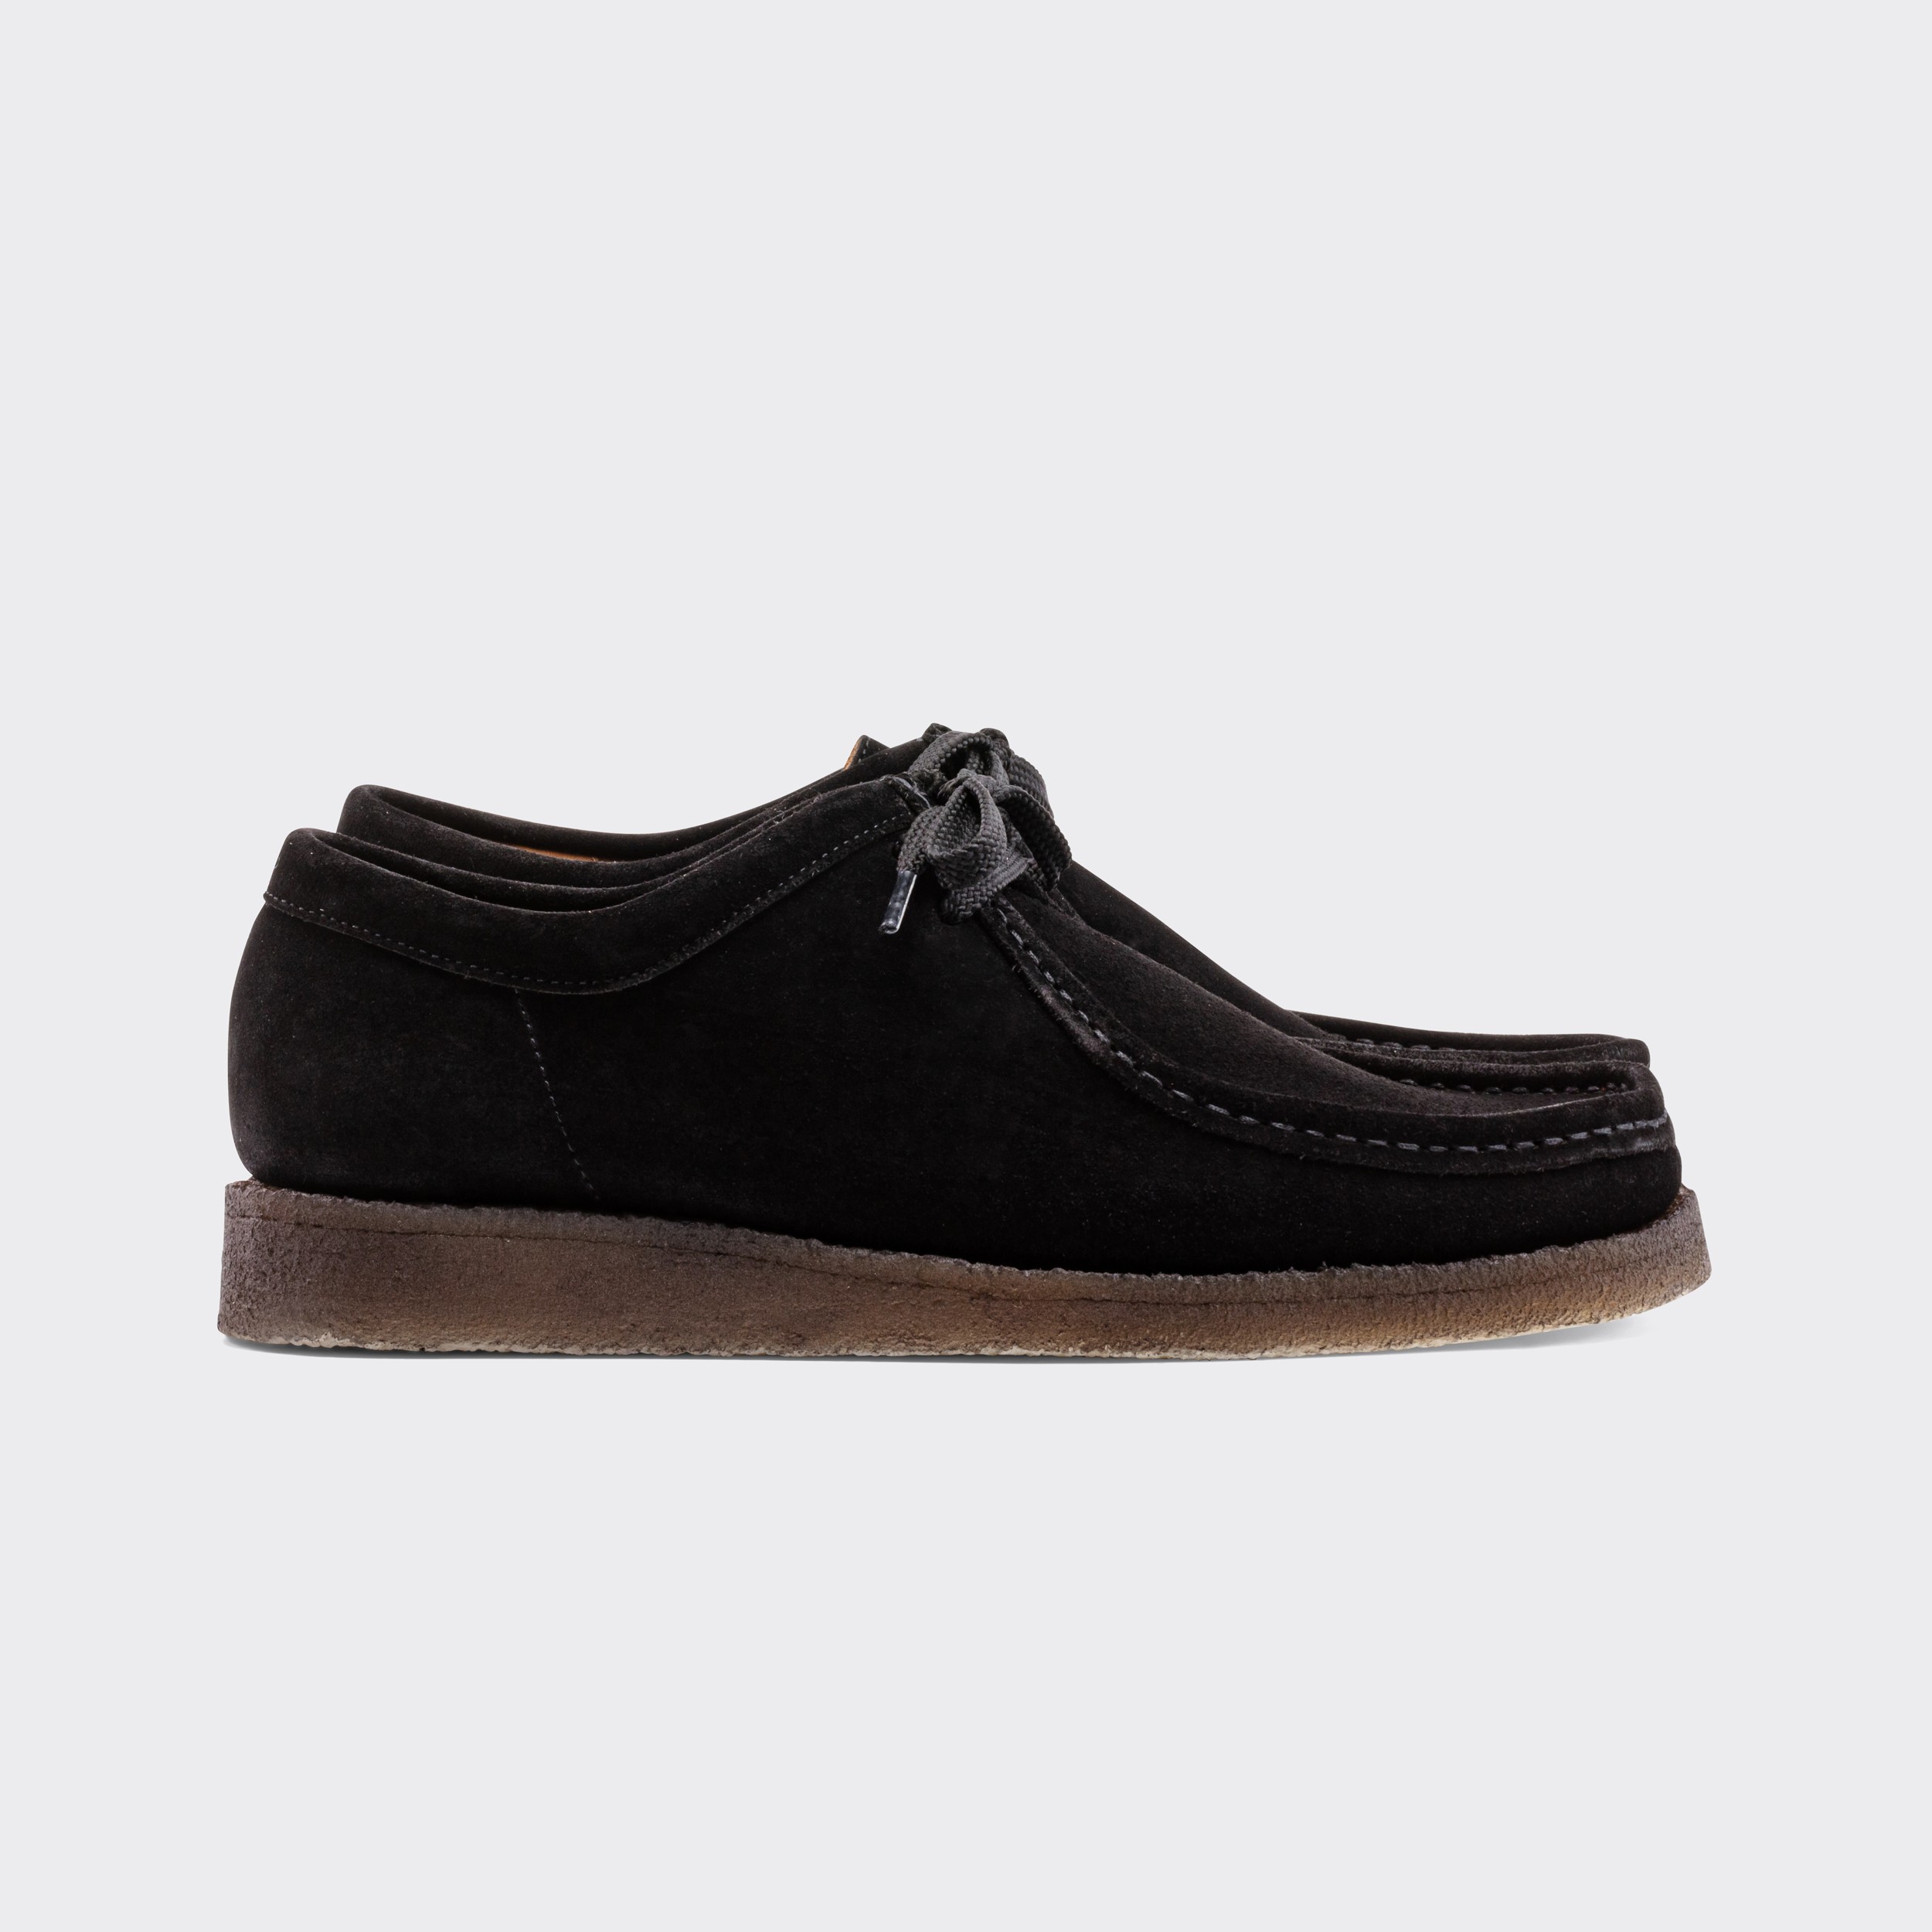 padmore and barnes wallabees